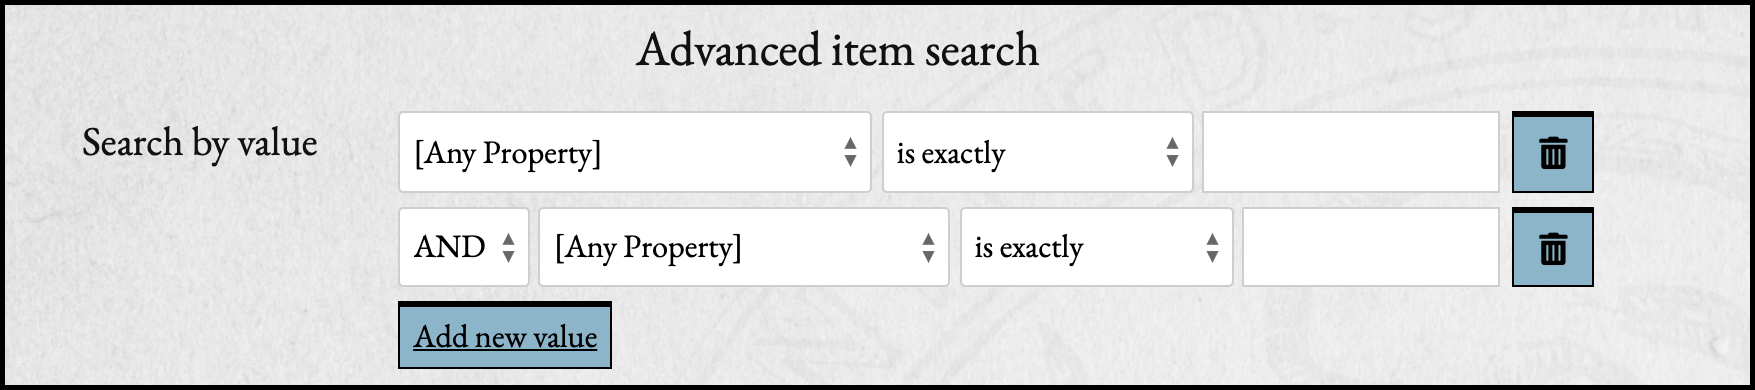 Detail screenshot of the "Search by value" options in an advanced item search, with two empty property fields joined by an "AND" search criteria.